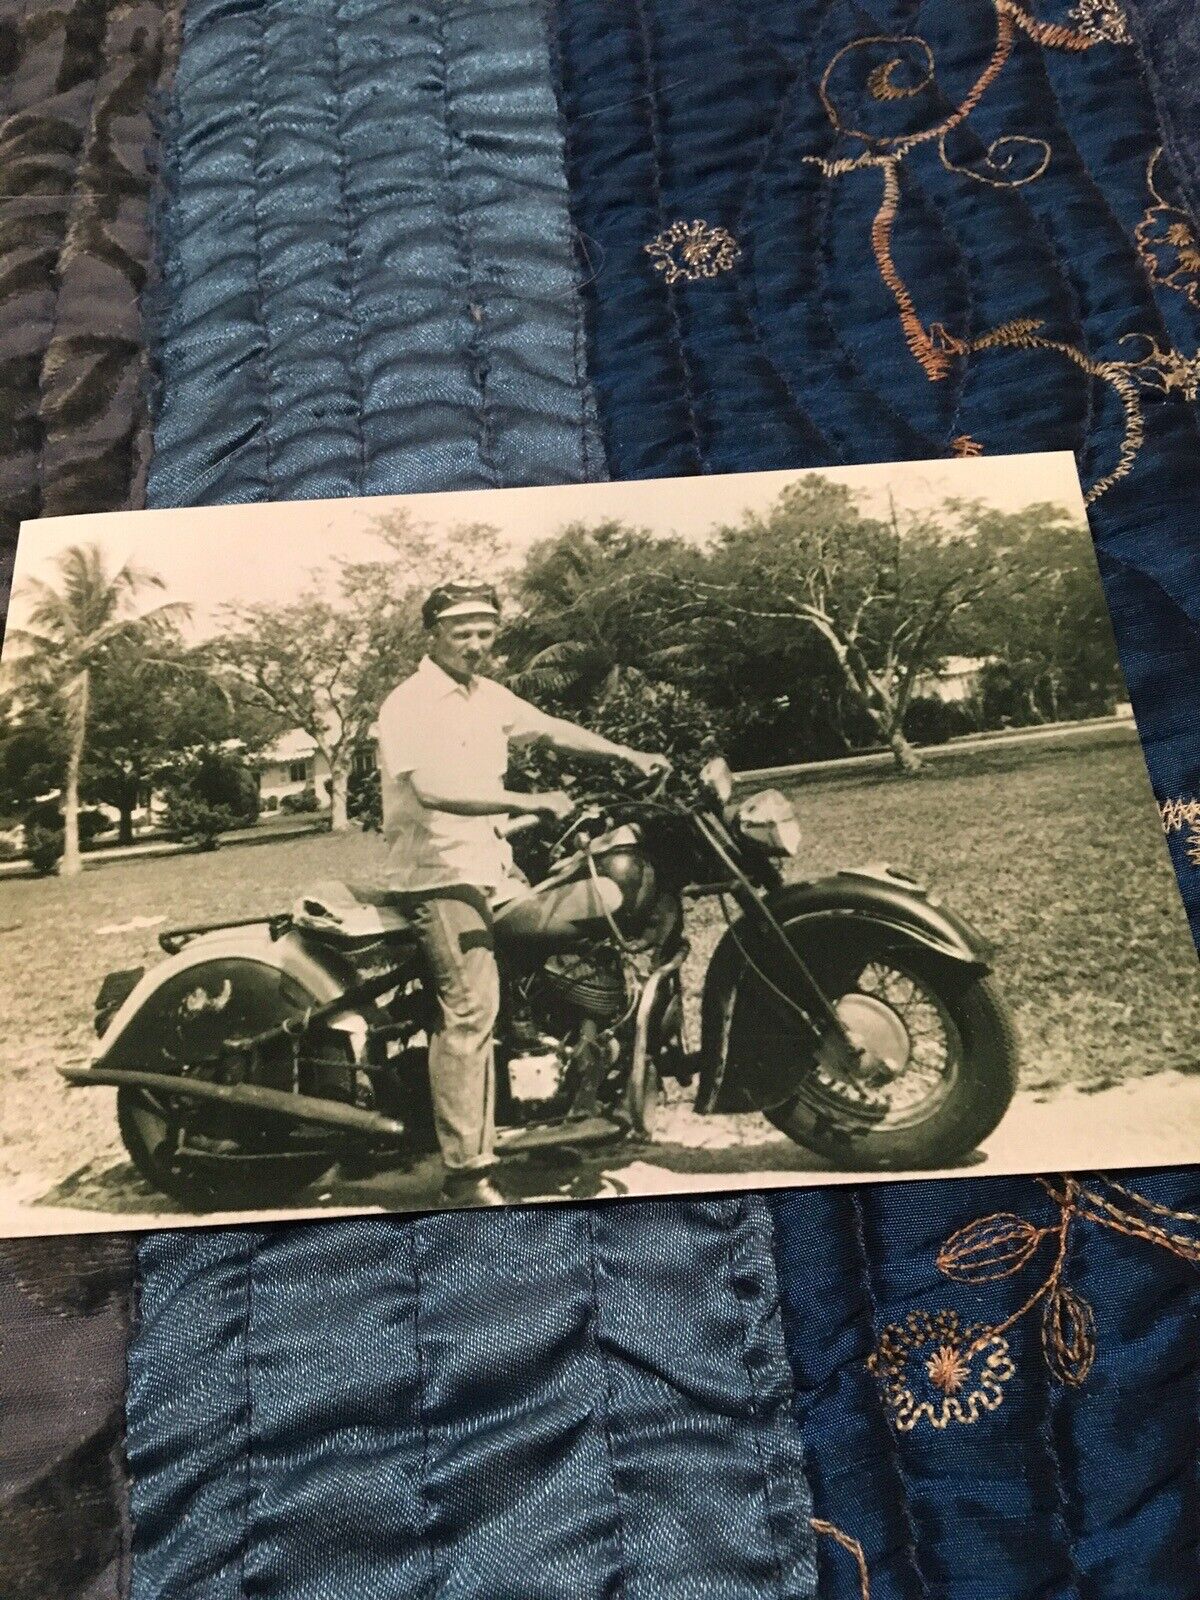 Made Copies of Cool Photo Man on Vintage Motorcycle Photo 4x6 Black And White.